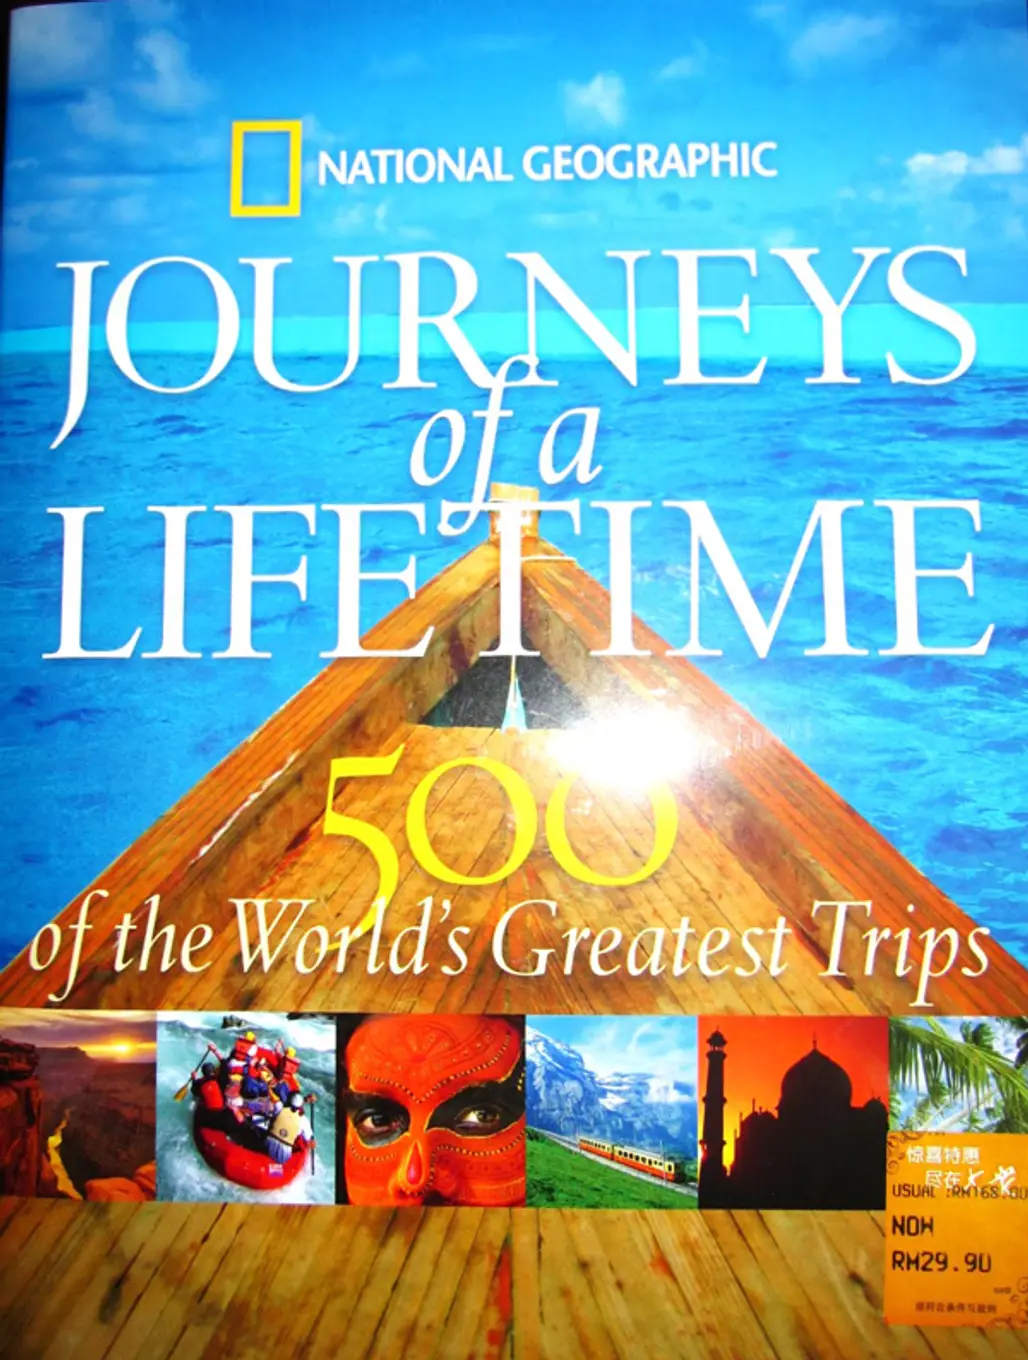 Journeys of a Lifetime - 500 of the World’s Greatest Trips: by National Geographic